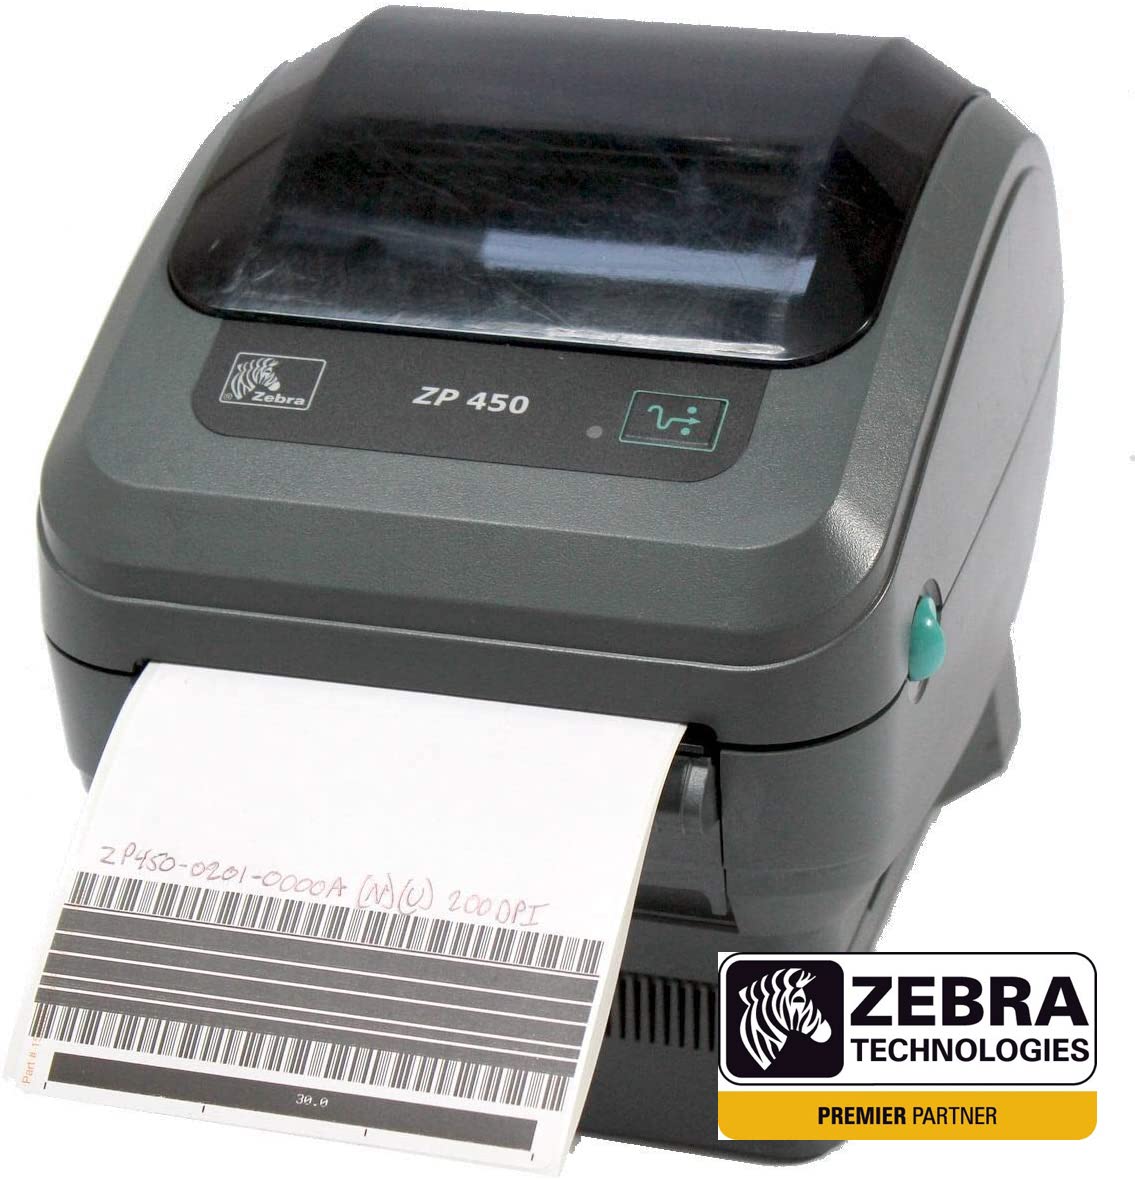 Gray Zebra ZP450 thermal laser printer printing out receipt with a barcode